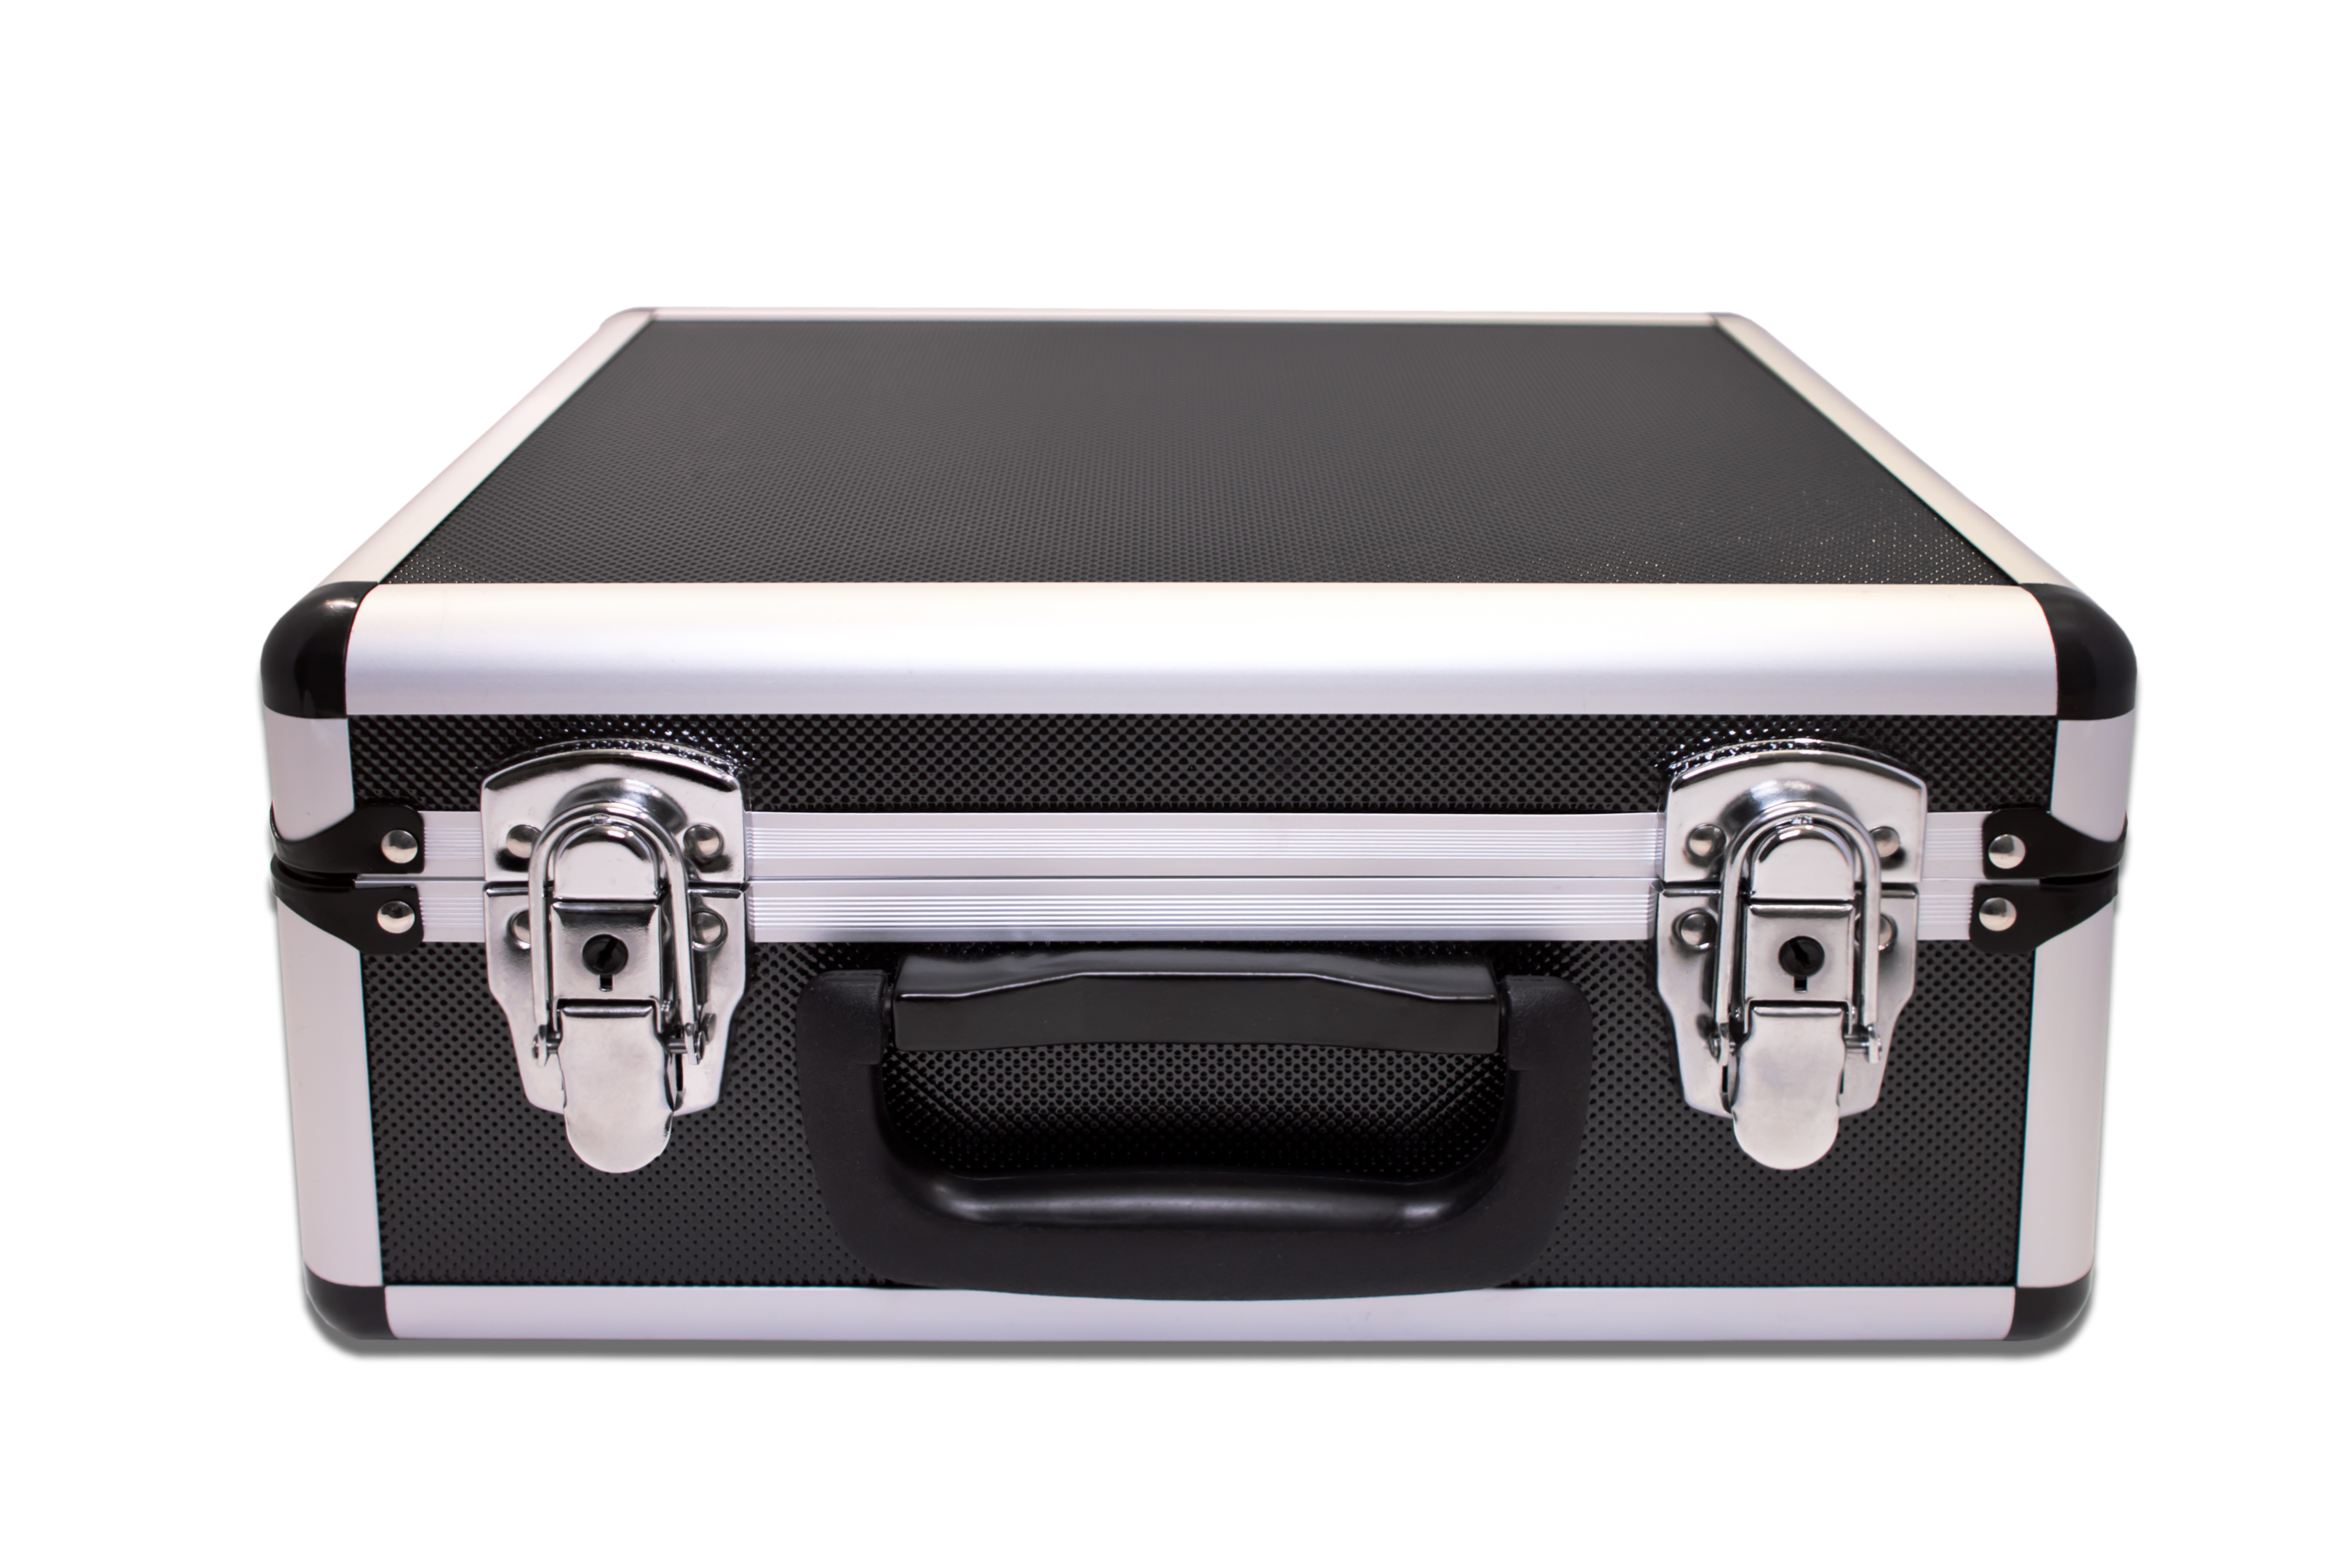 «PeakTech® P 7300» Carrying Case for Measurement Instruments